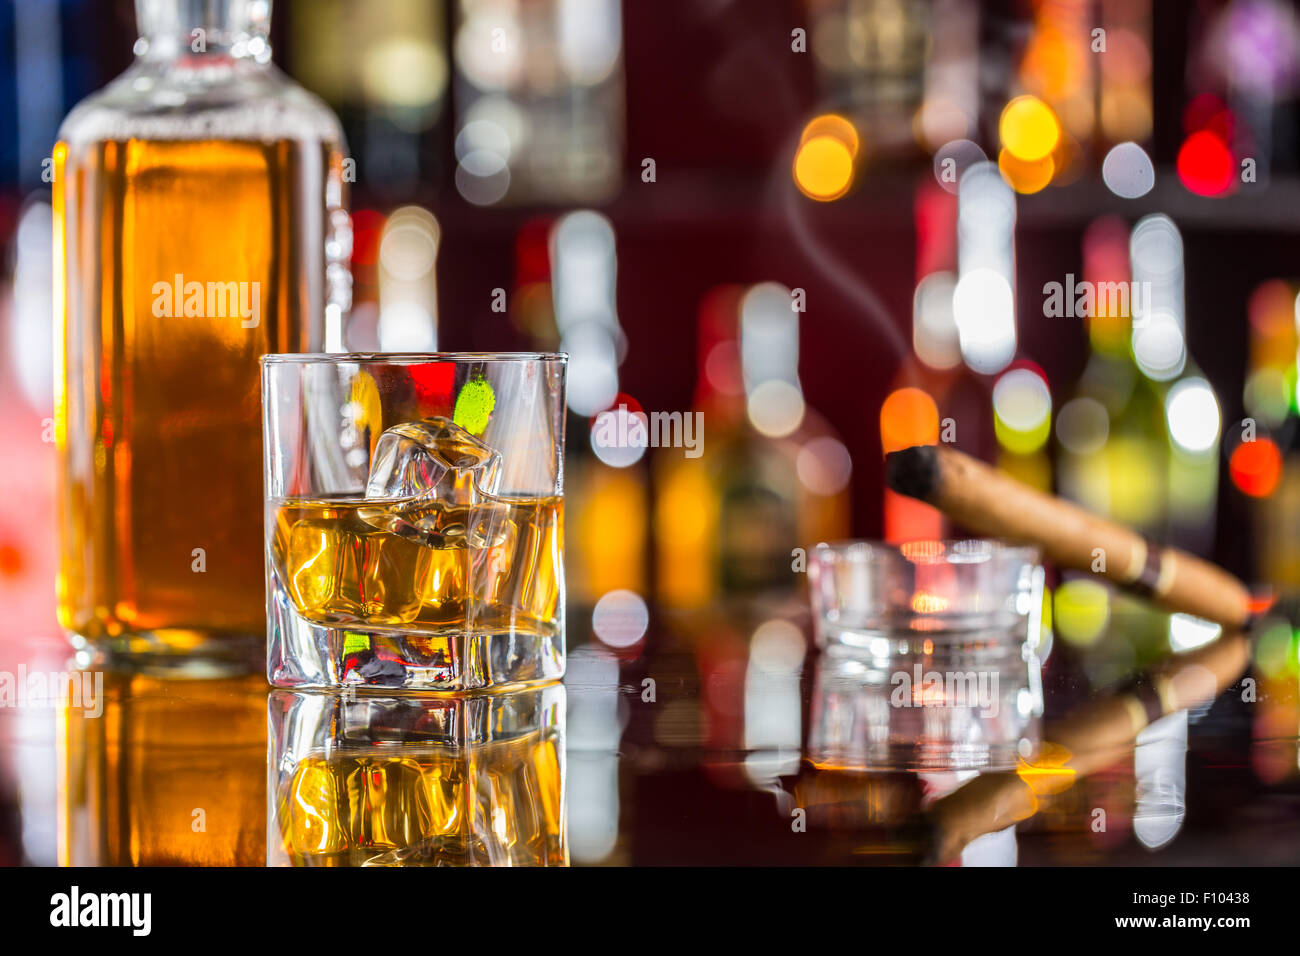 Whiskey drink on bar counter Stock Photo